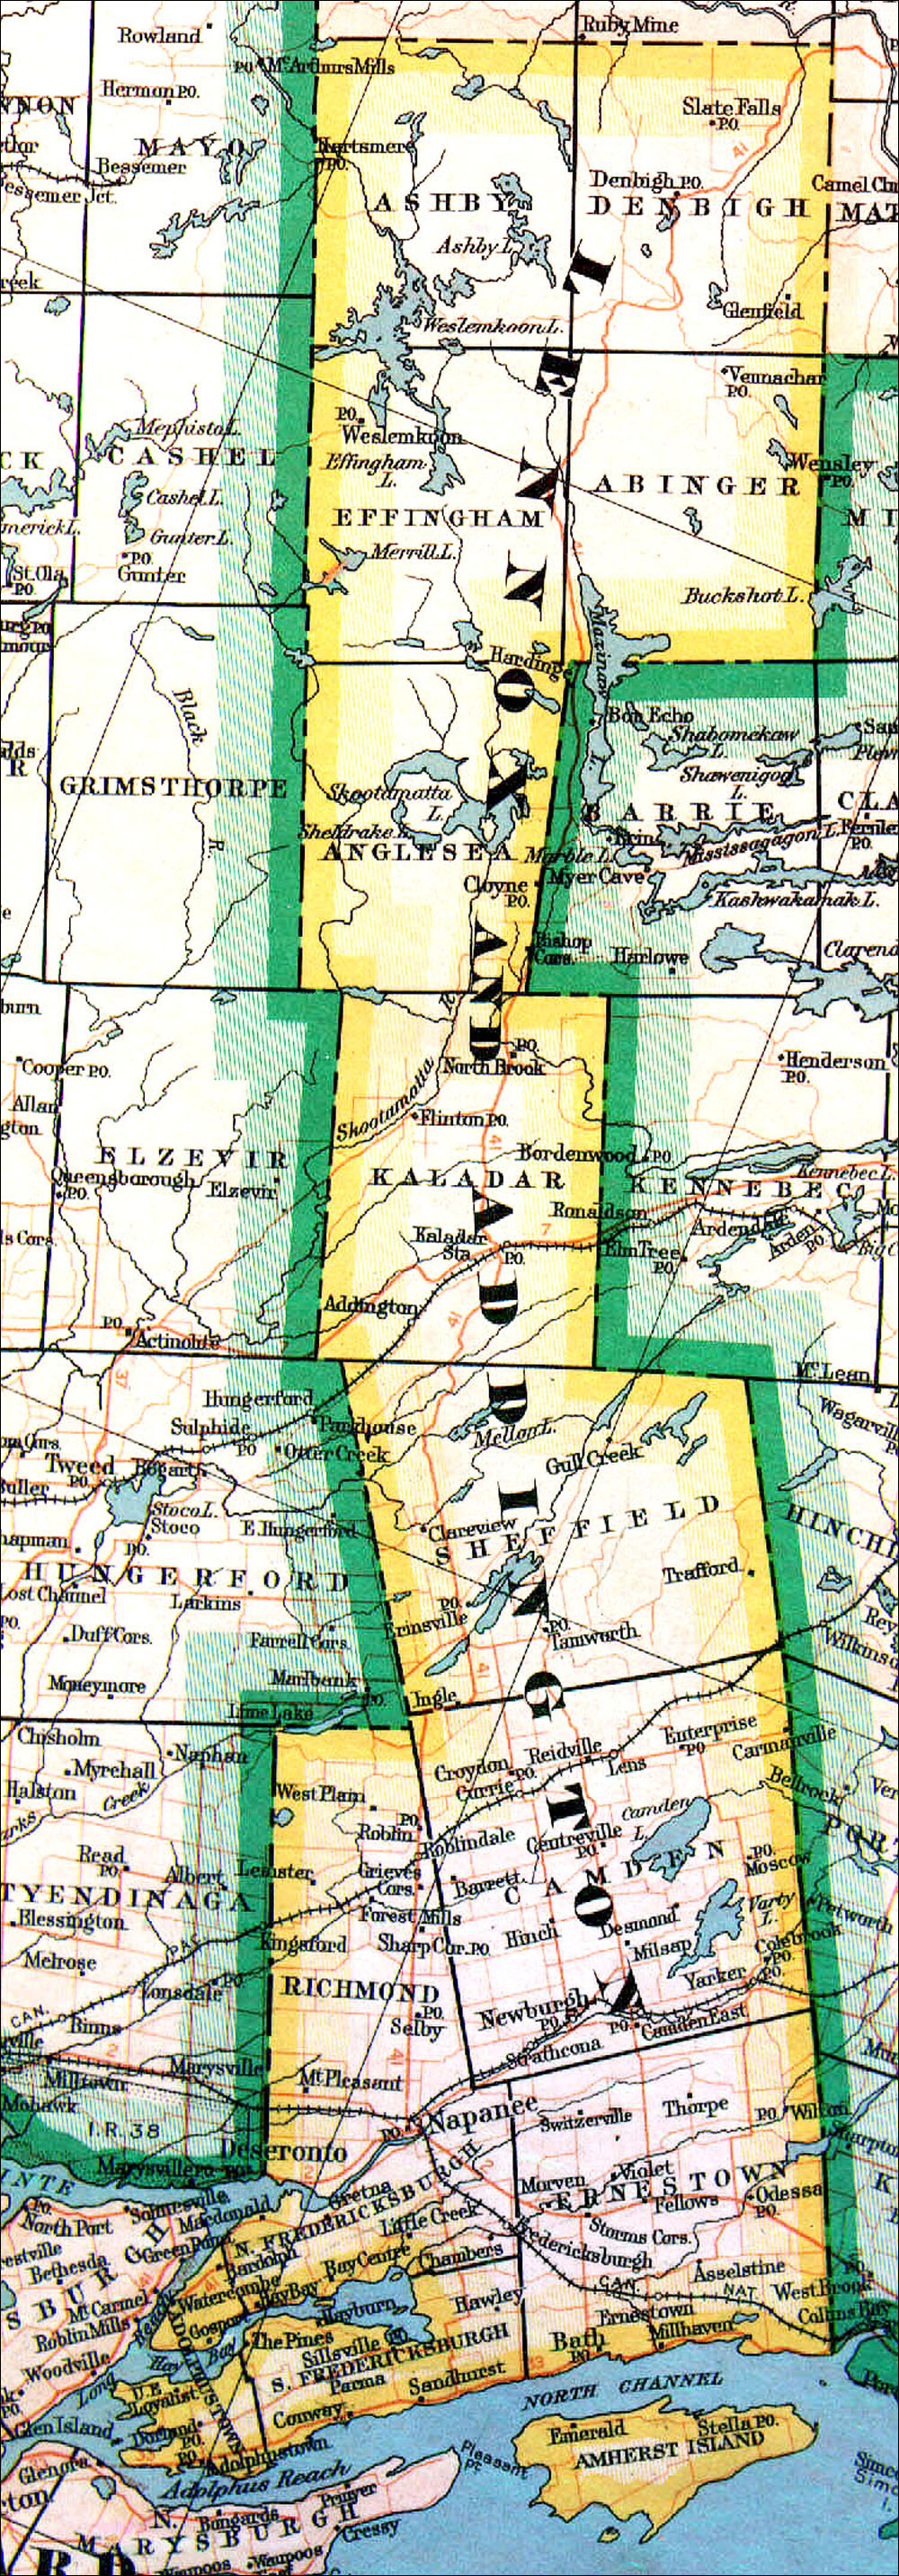 Large scale map of County of Lennox and Addington